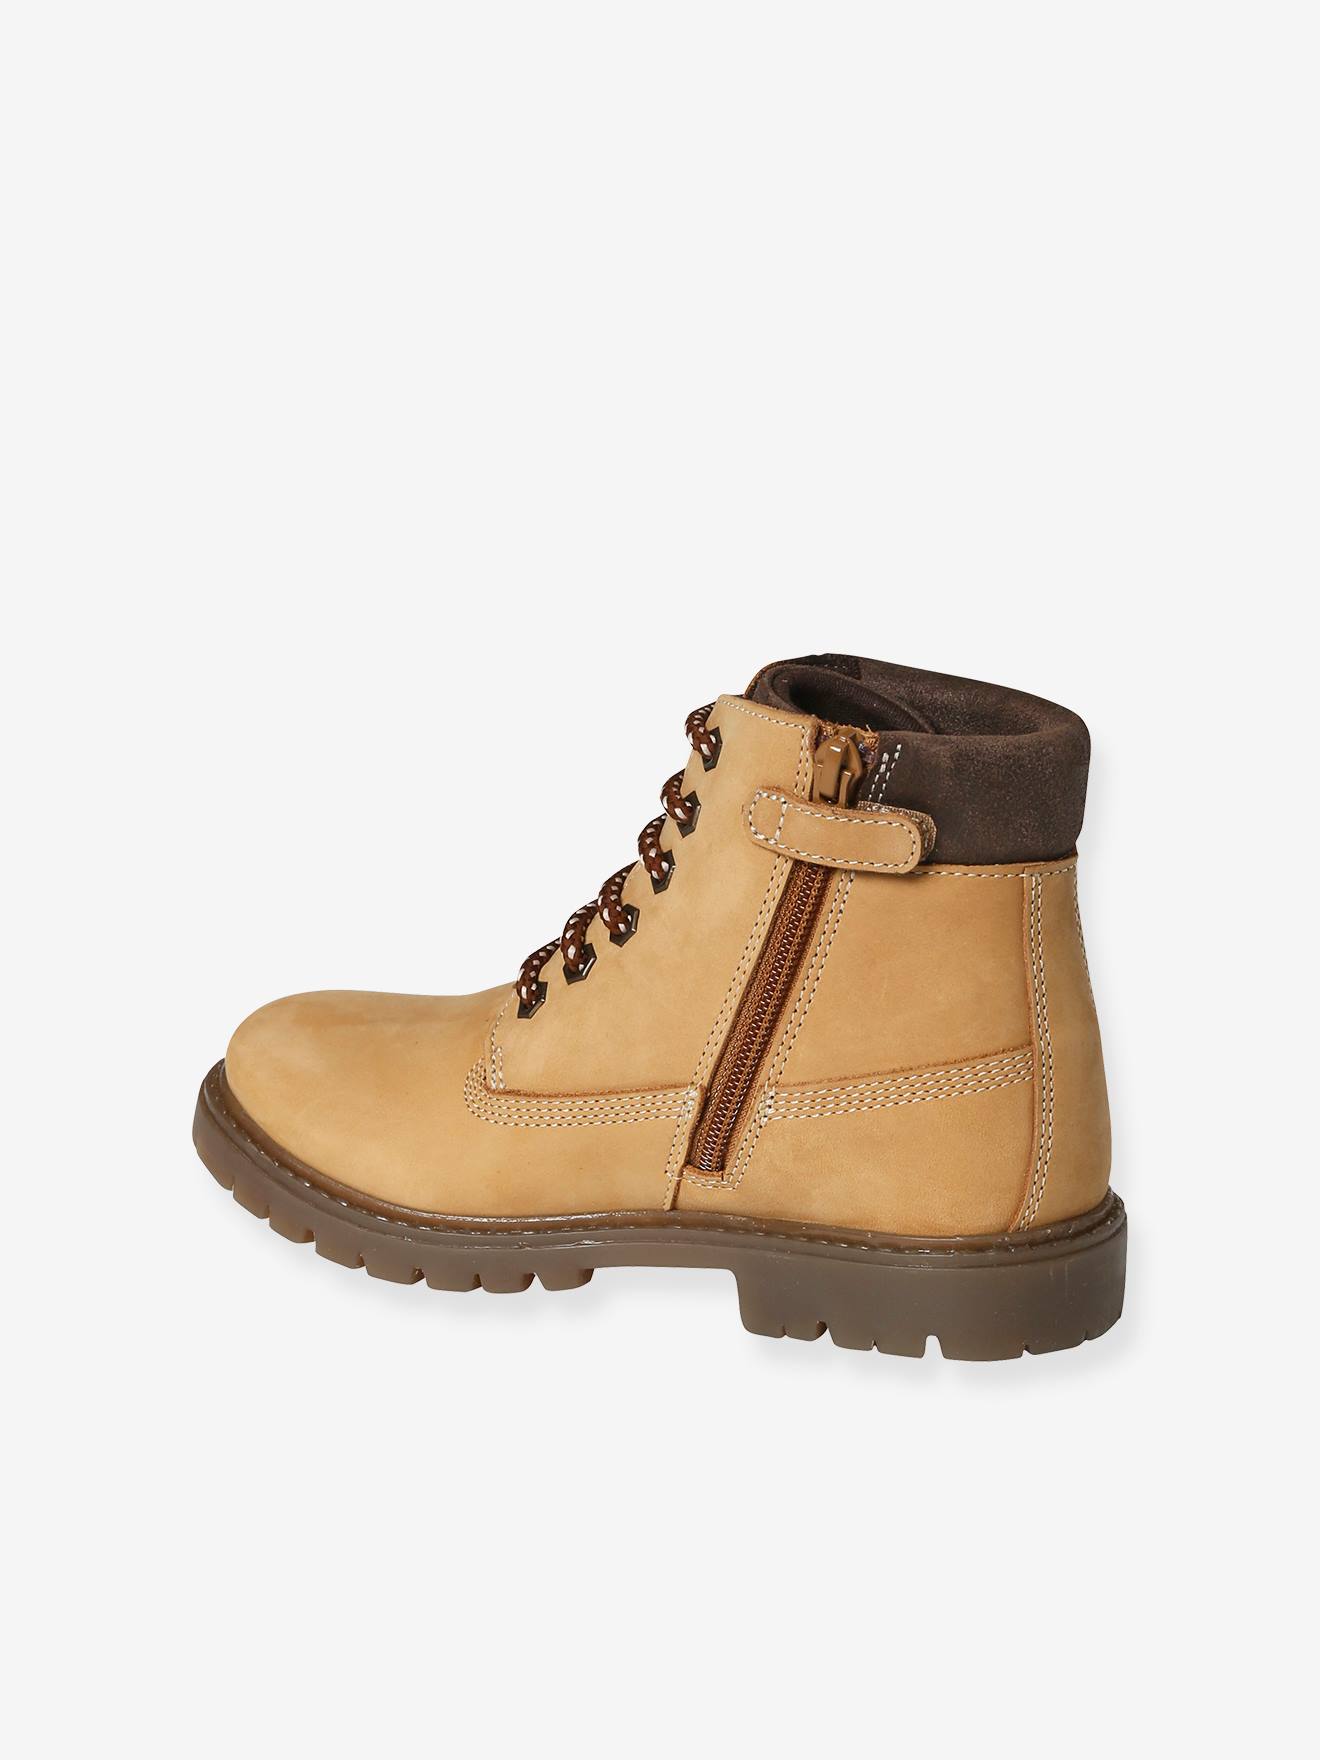 Leather Boots with Laces & Zip, for Boys Brown Dark Solid